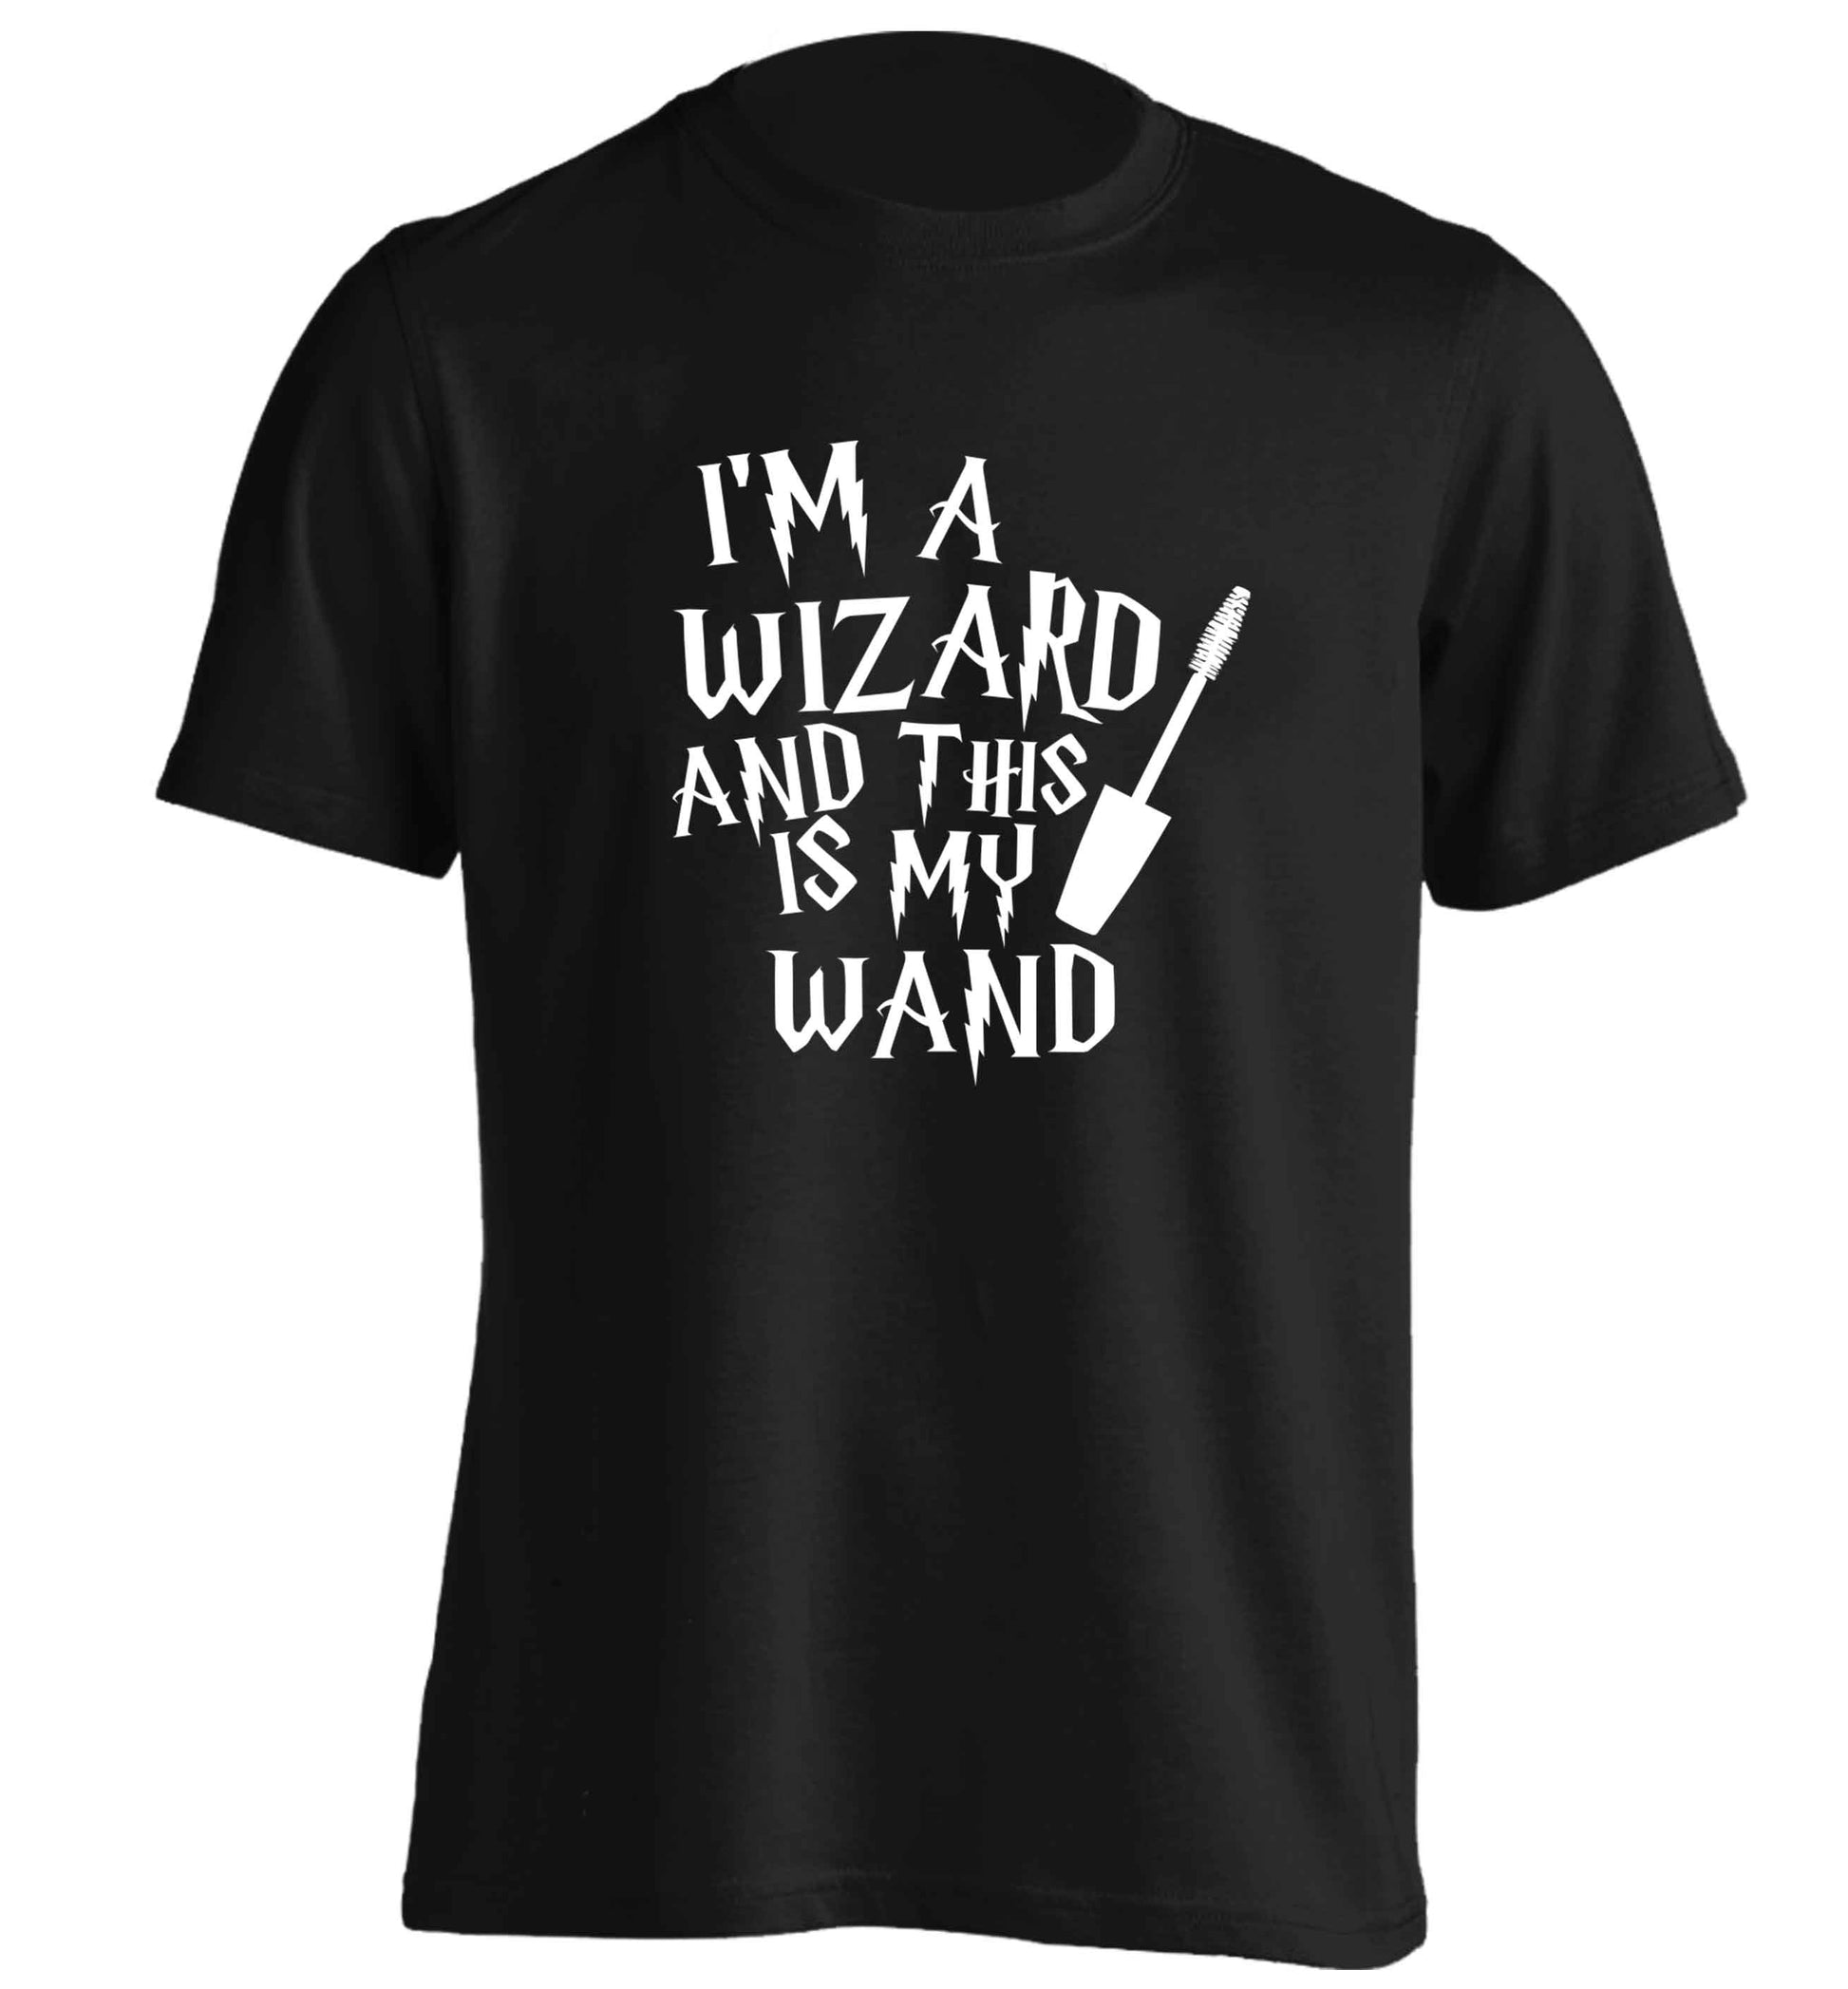 I'm a wizard and this is my wand adults unisex black Tshirt 2XL